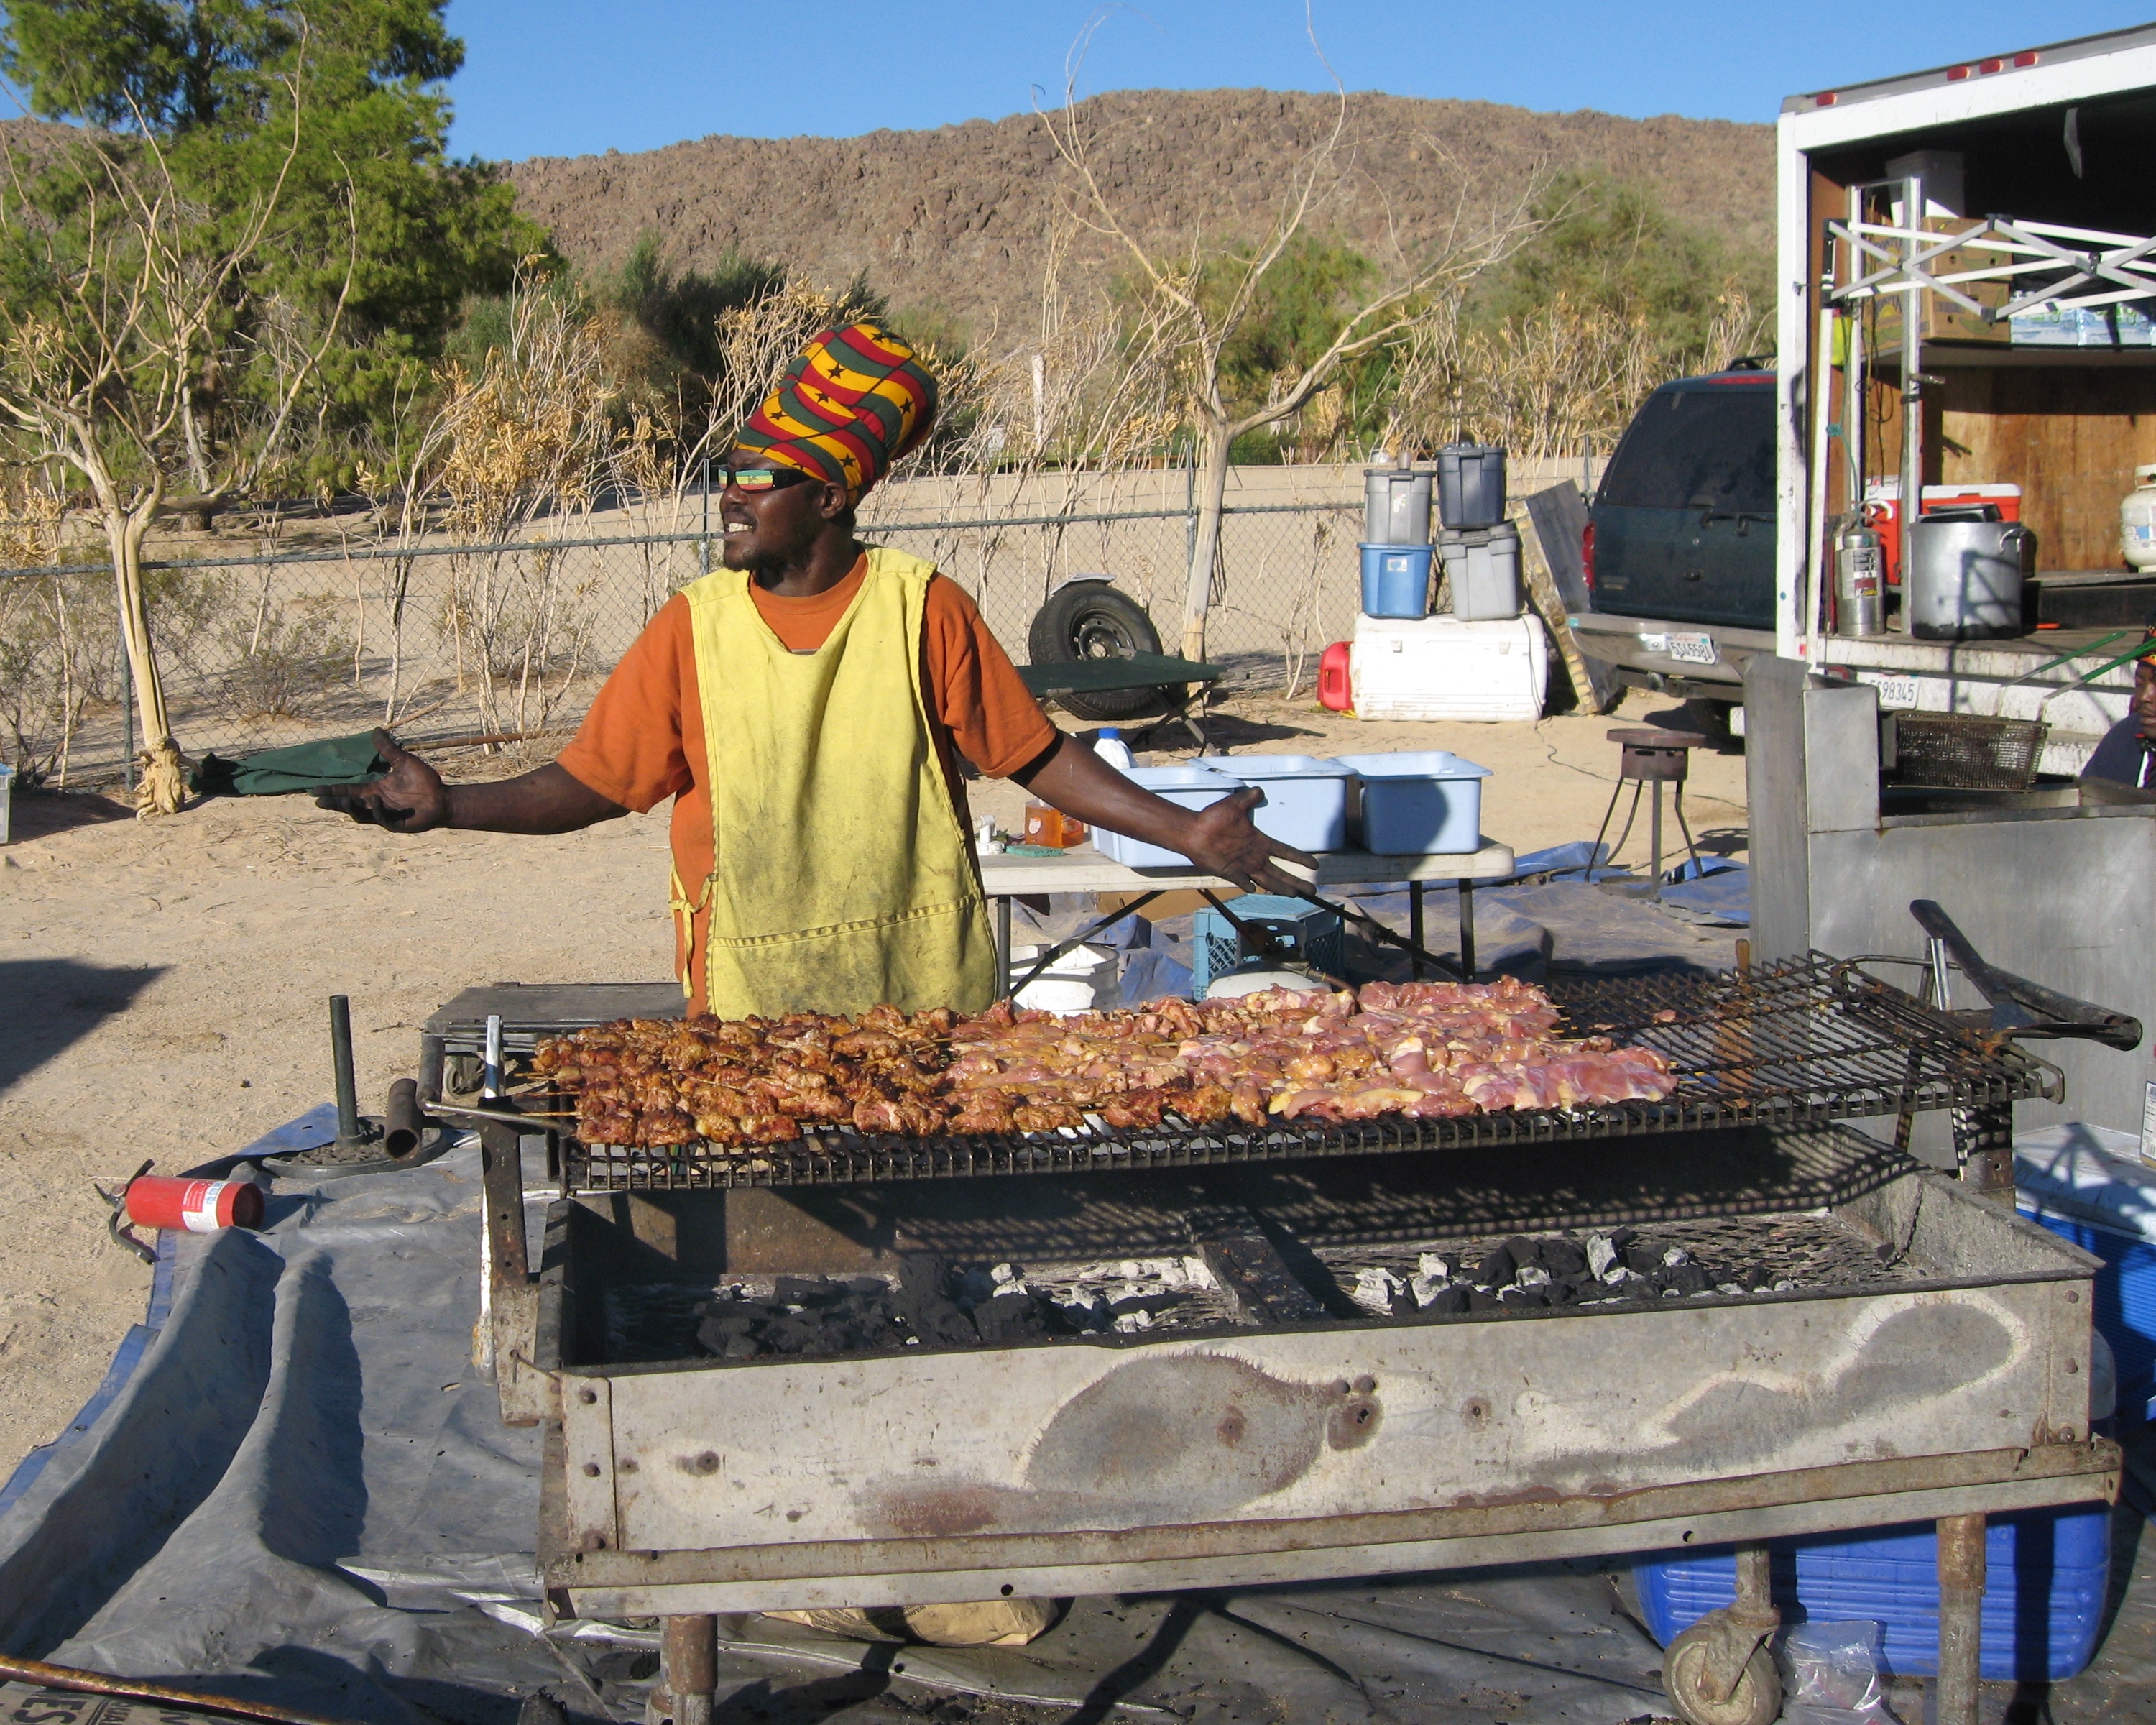 File:Barbecue chef at festival.jpg - Wikipedia, the free encyclopedia